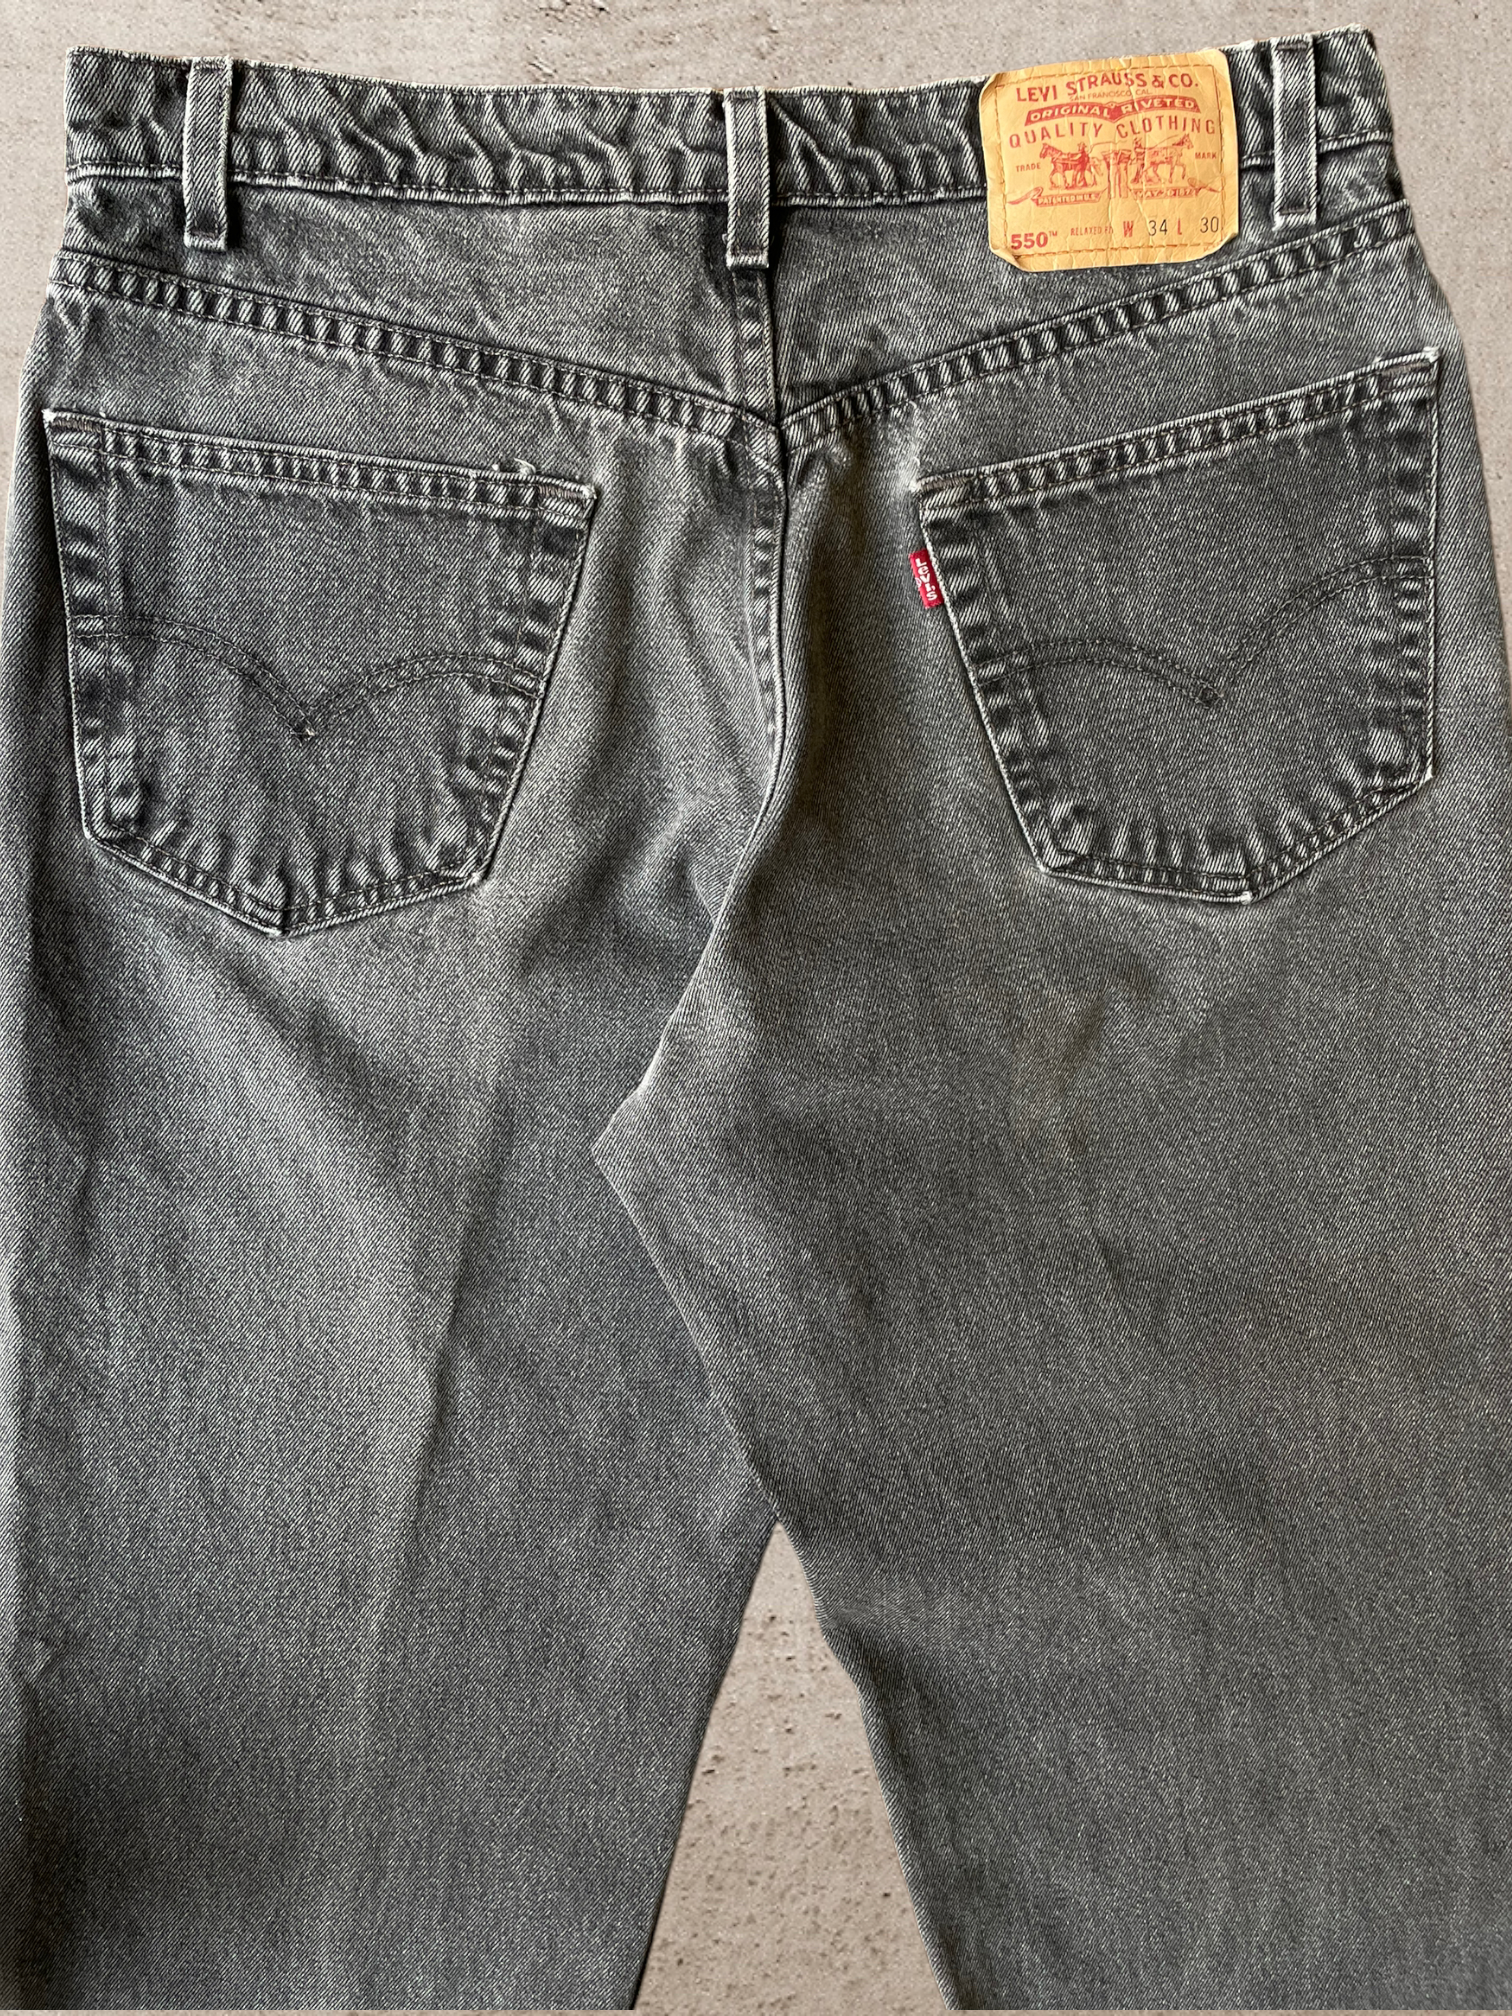 80s Levis 550 Relaxed Fit Jeans - 33x30